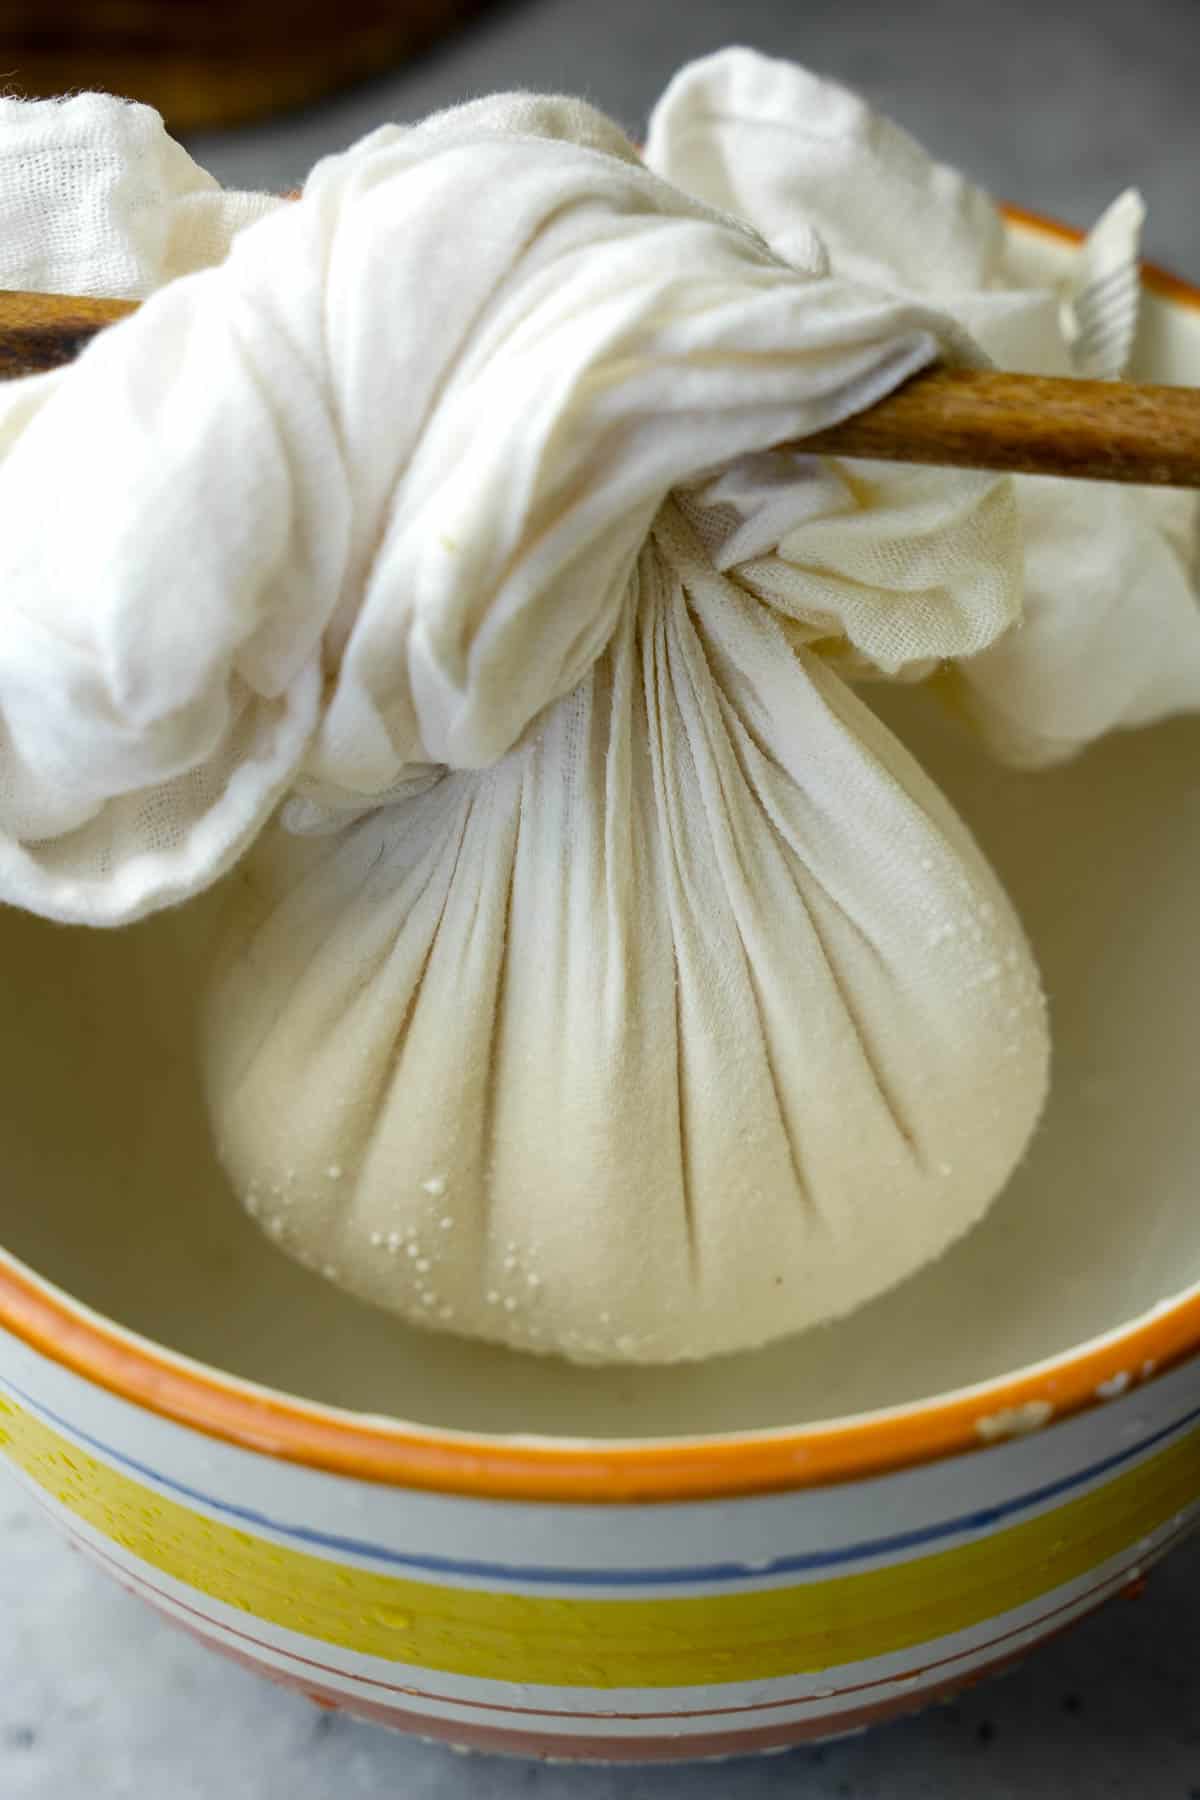 A portion of labneh draining into a bowl. The cheesecloth package is suspended in the bowl from a wooden spoon it is tied around.